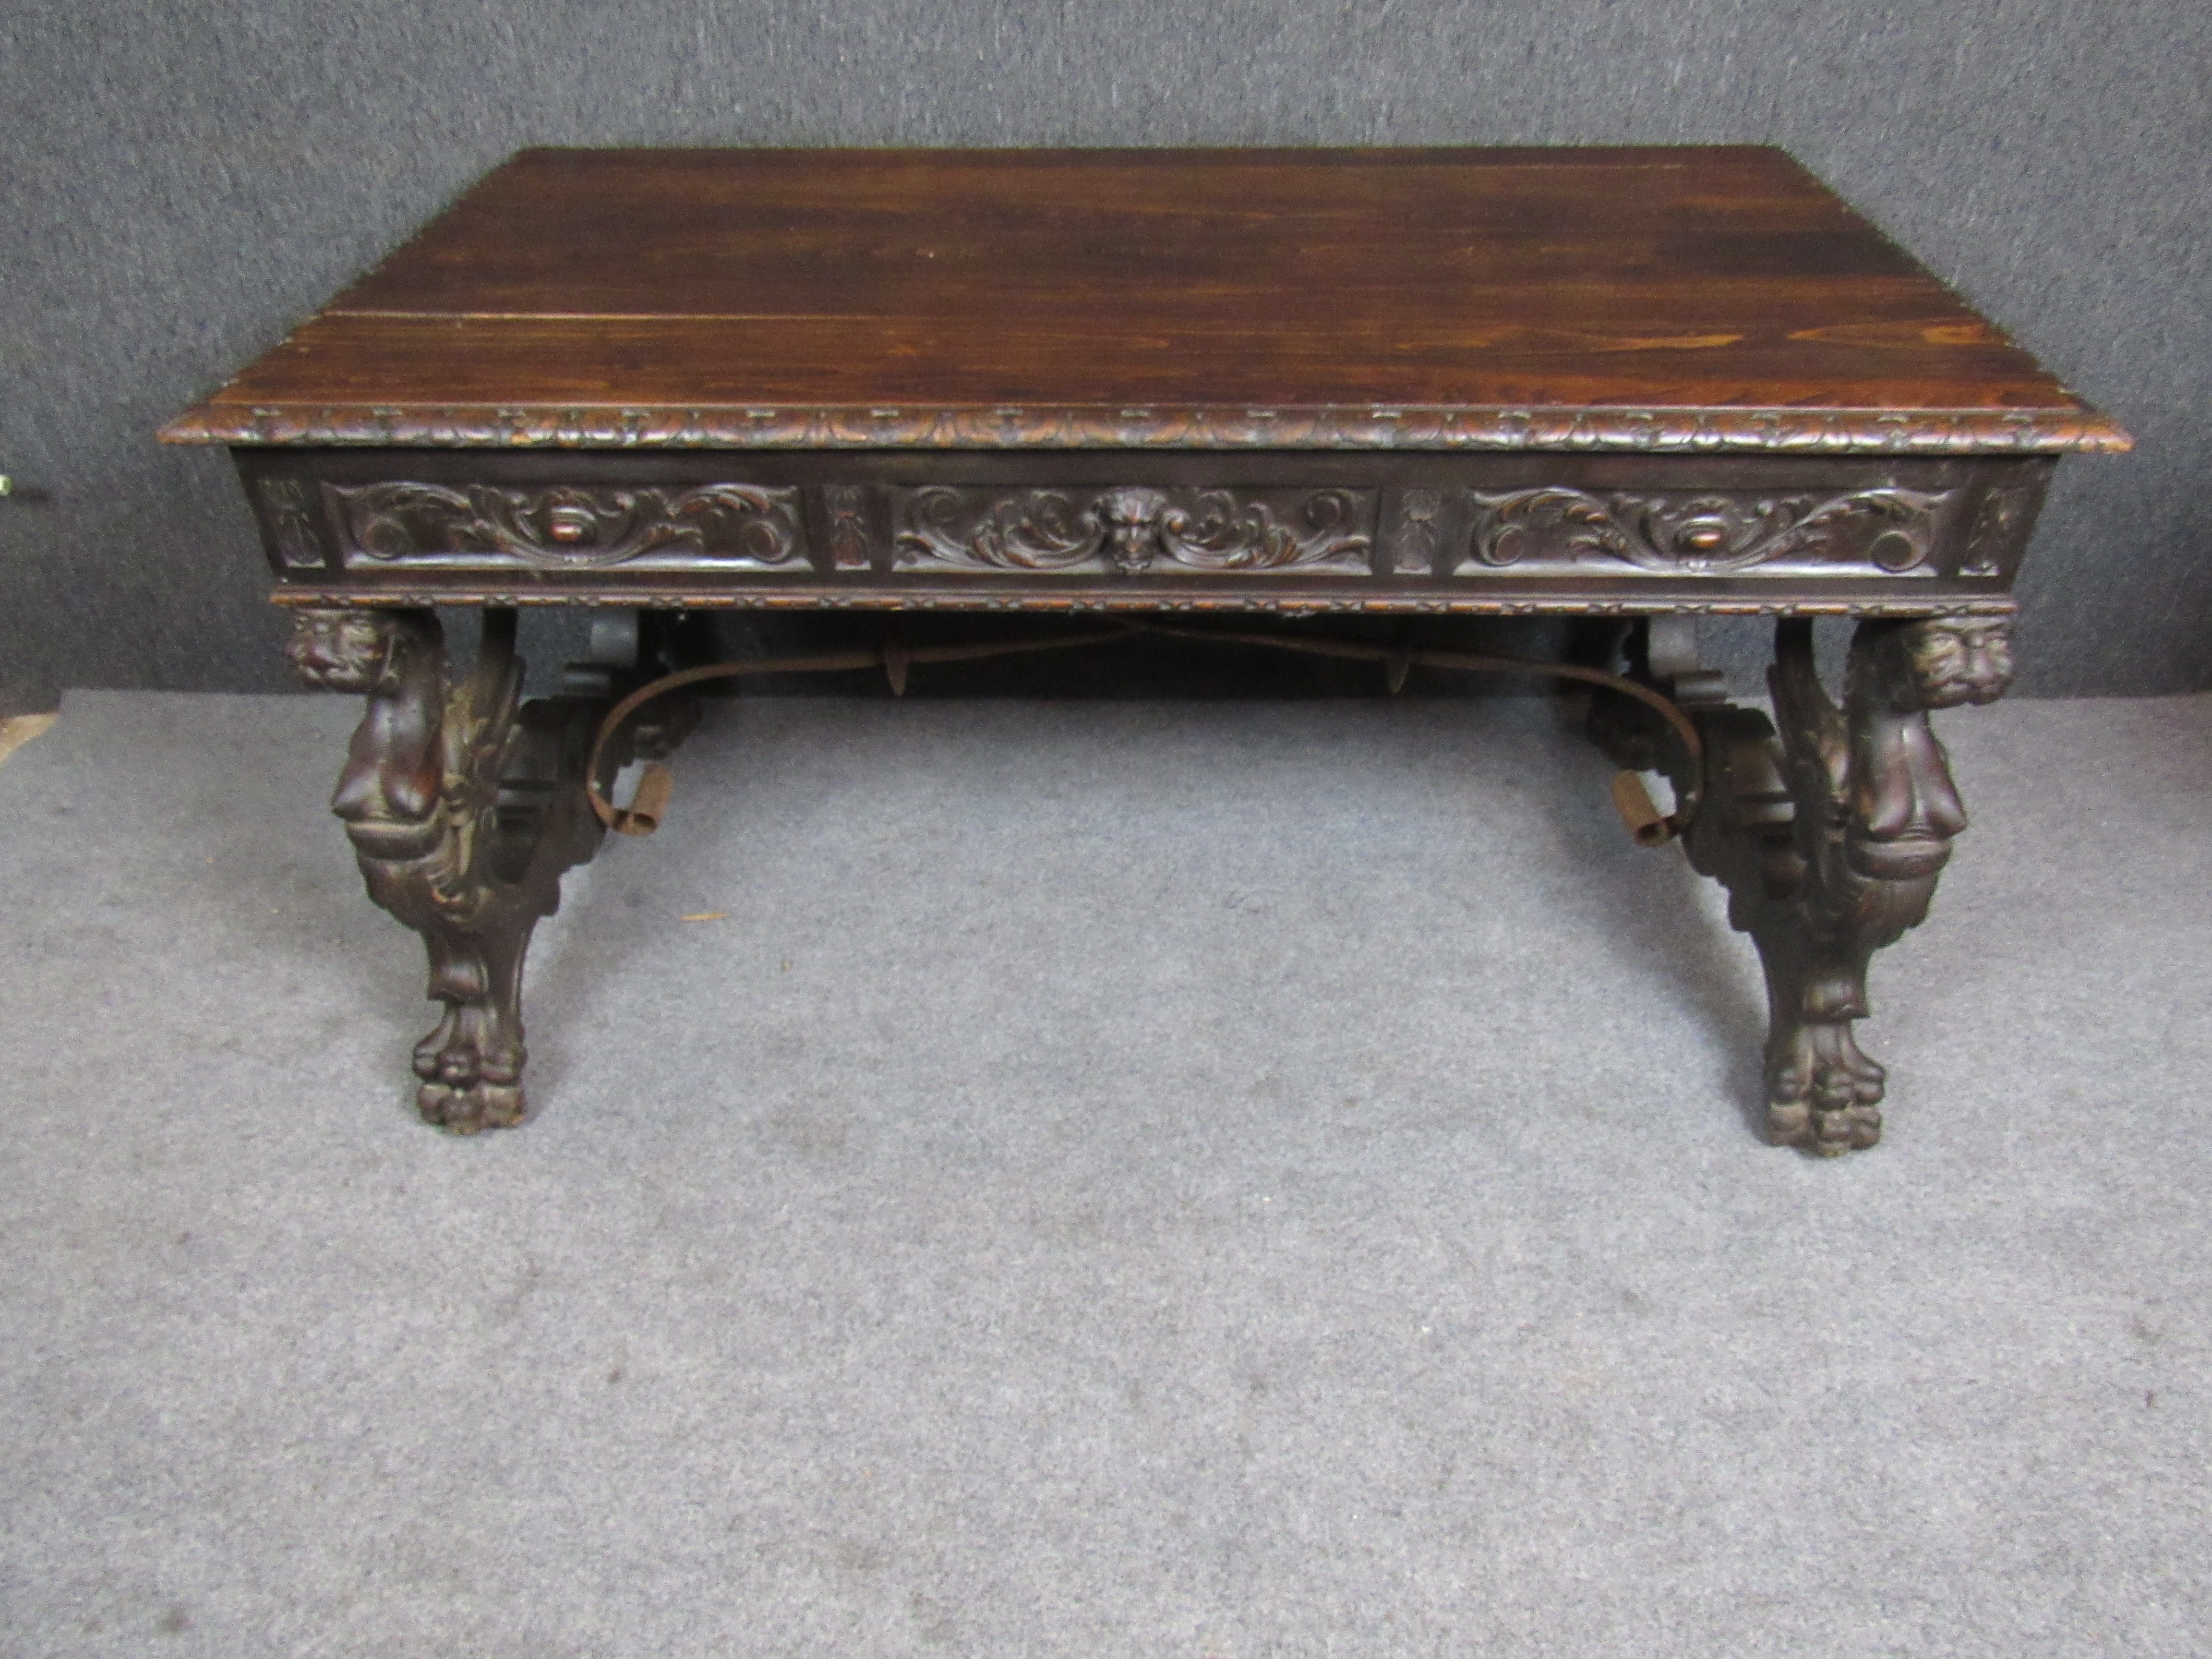 Here is a once in a lifetime antique Spanish hand-carved oak desk with striking gothic details. Featuring an imposing, mythical Griffin base, three beautifully sculpted gargoyle drawers, and an ample table top, this desk is sure to make a bold